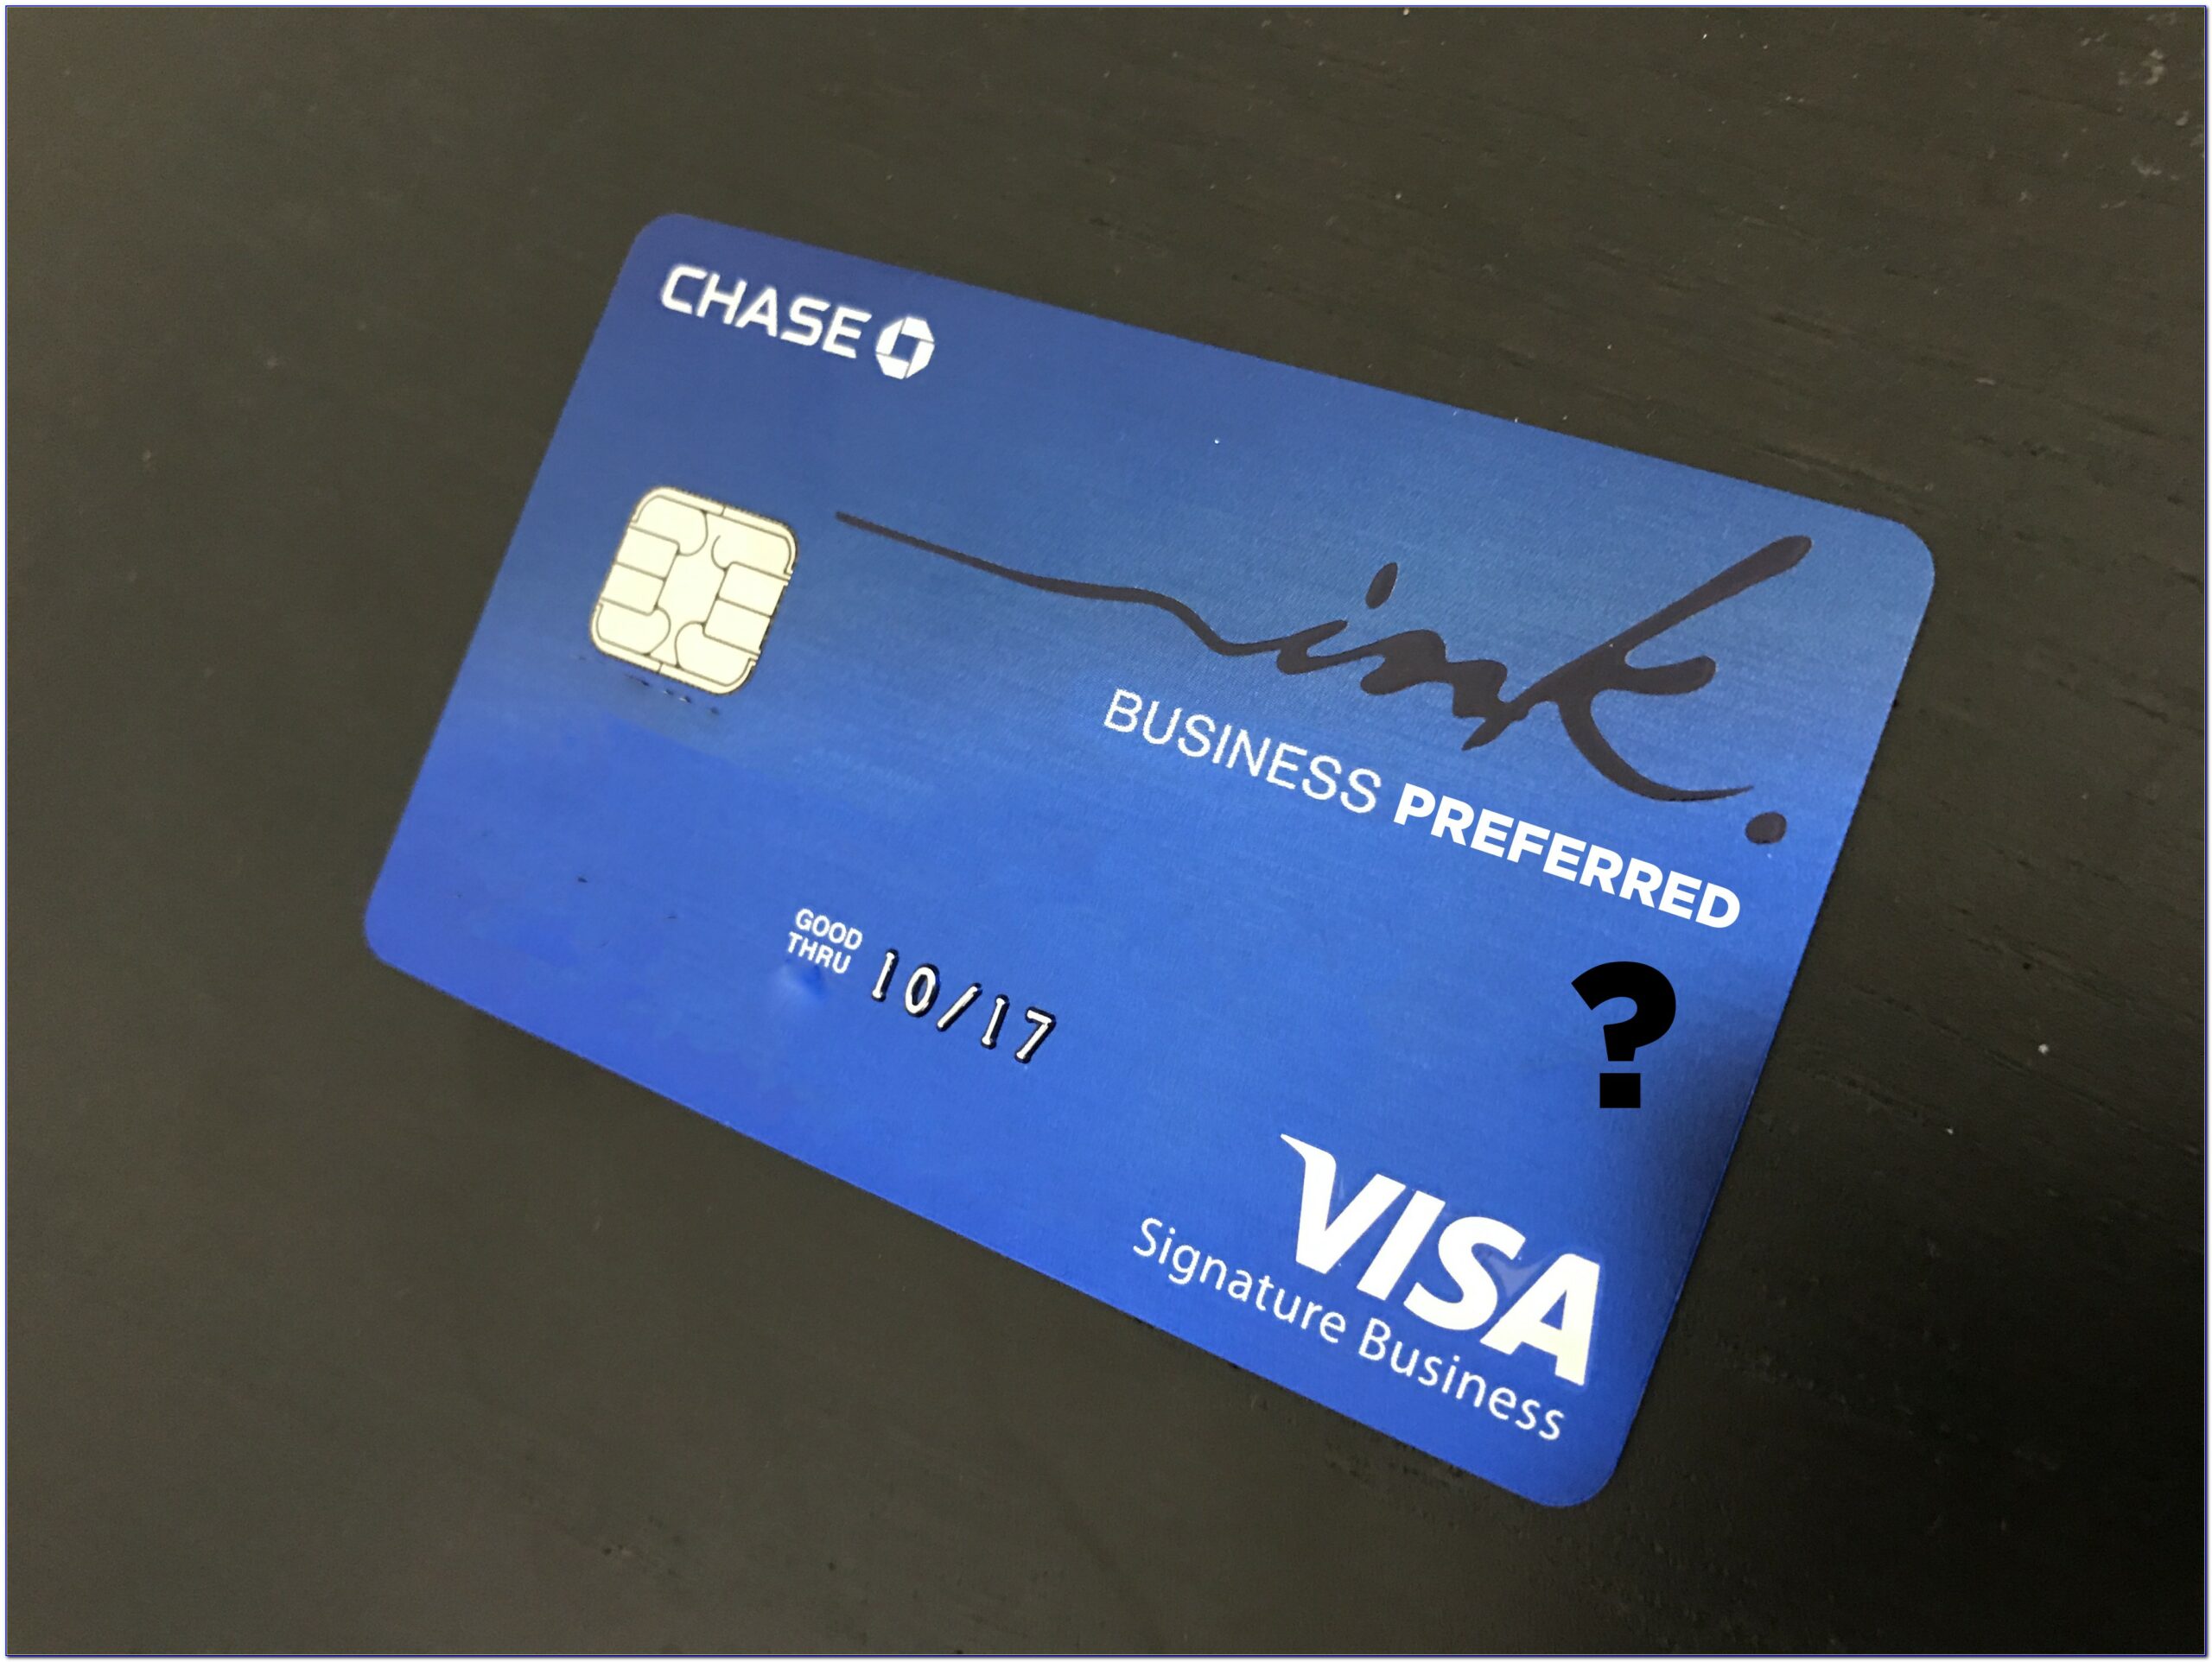 Chase Ink Business Preferred Card Phone Number